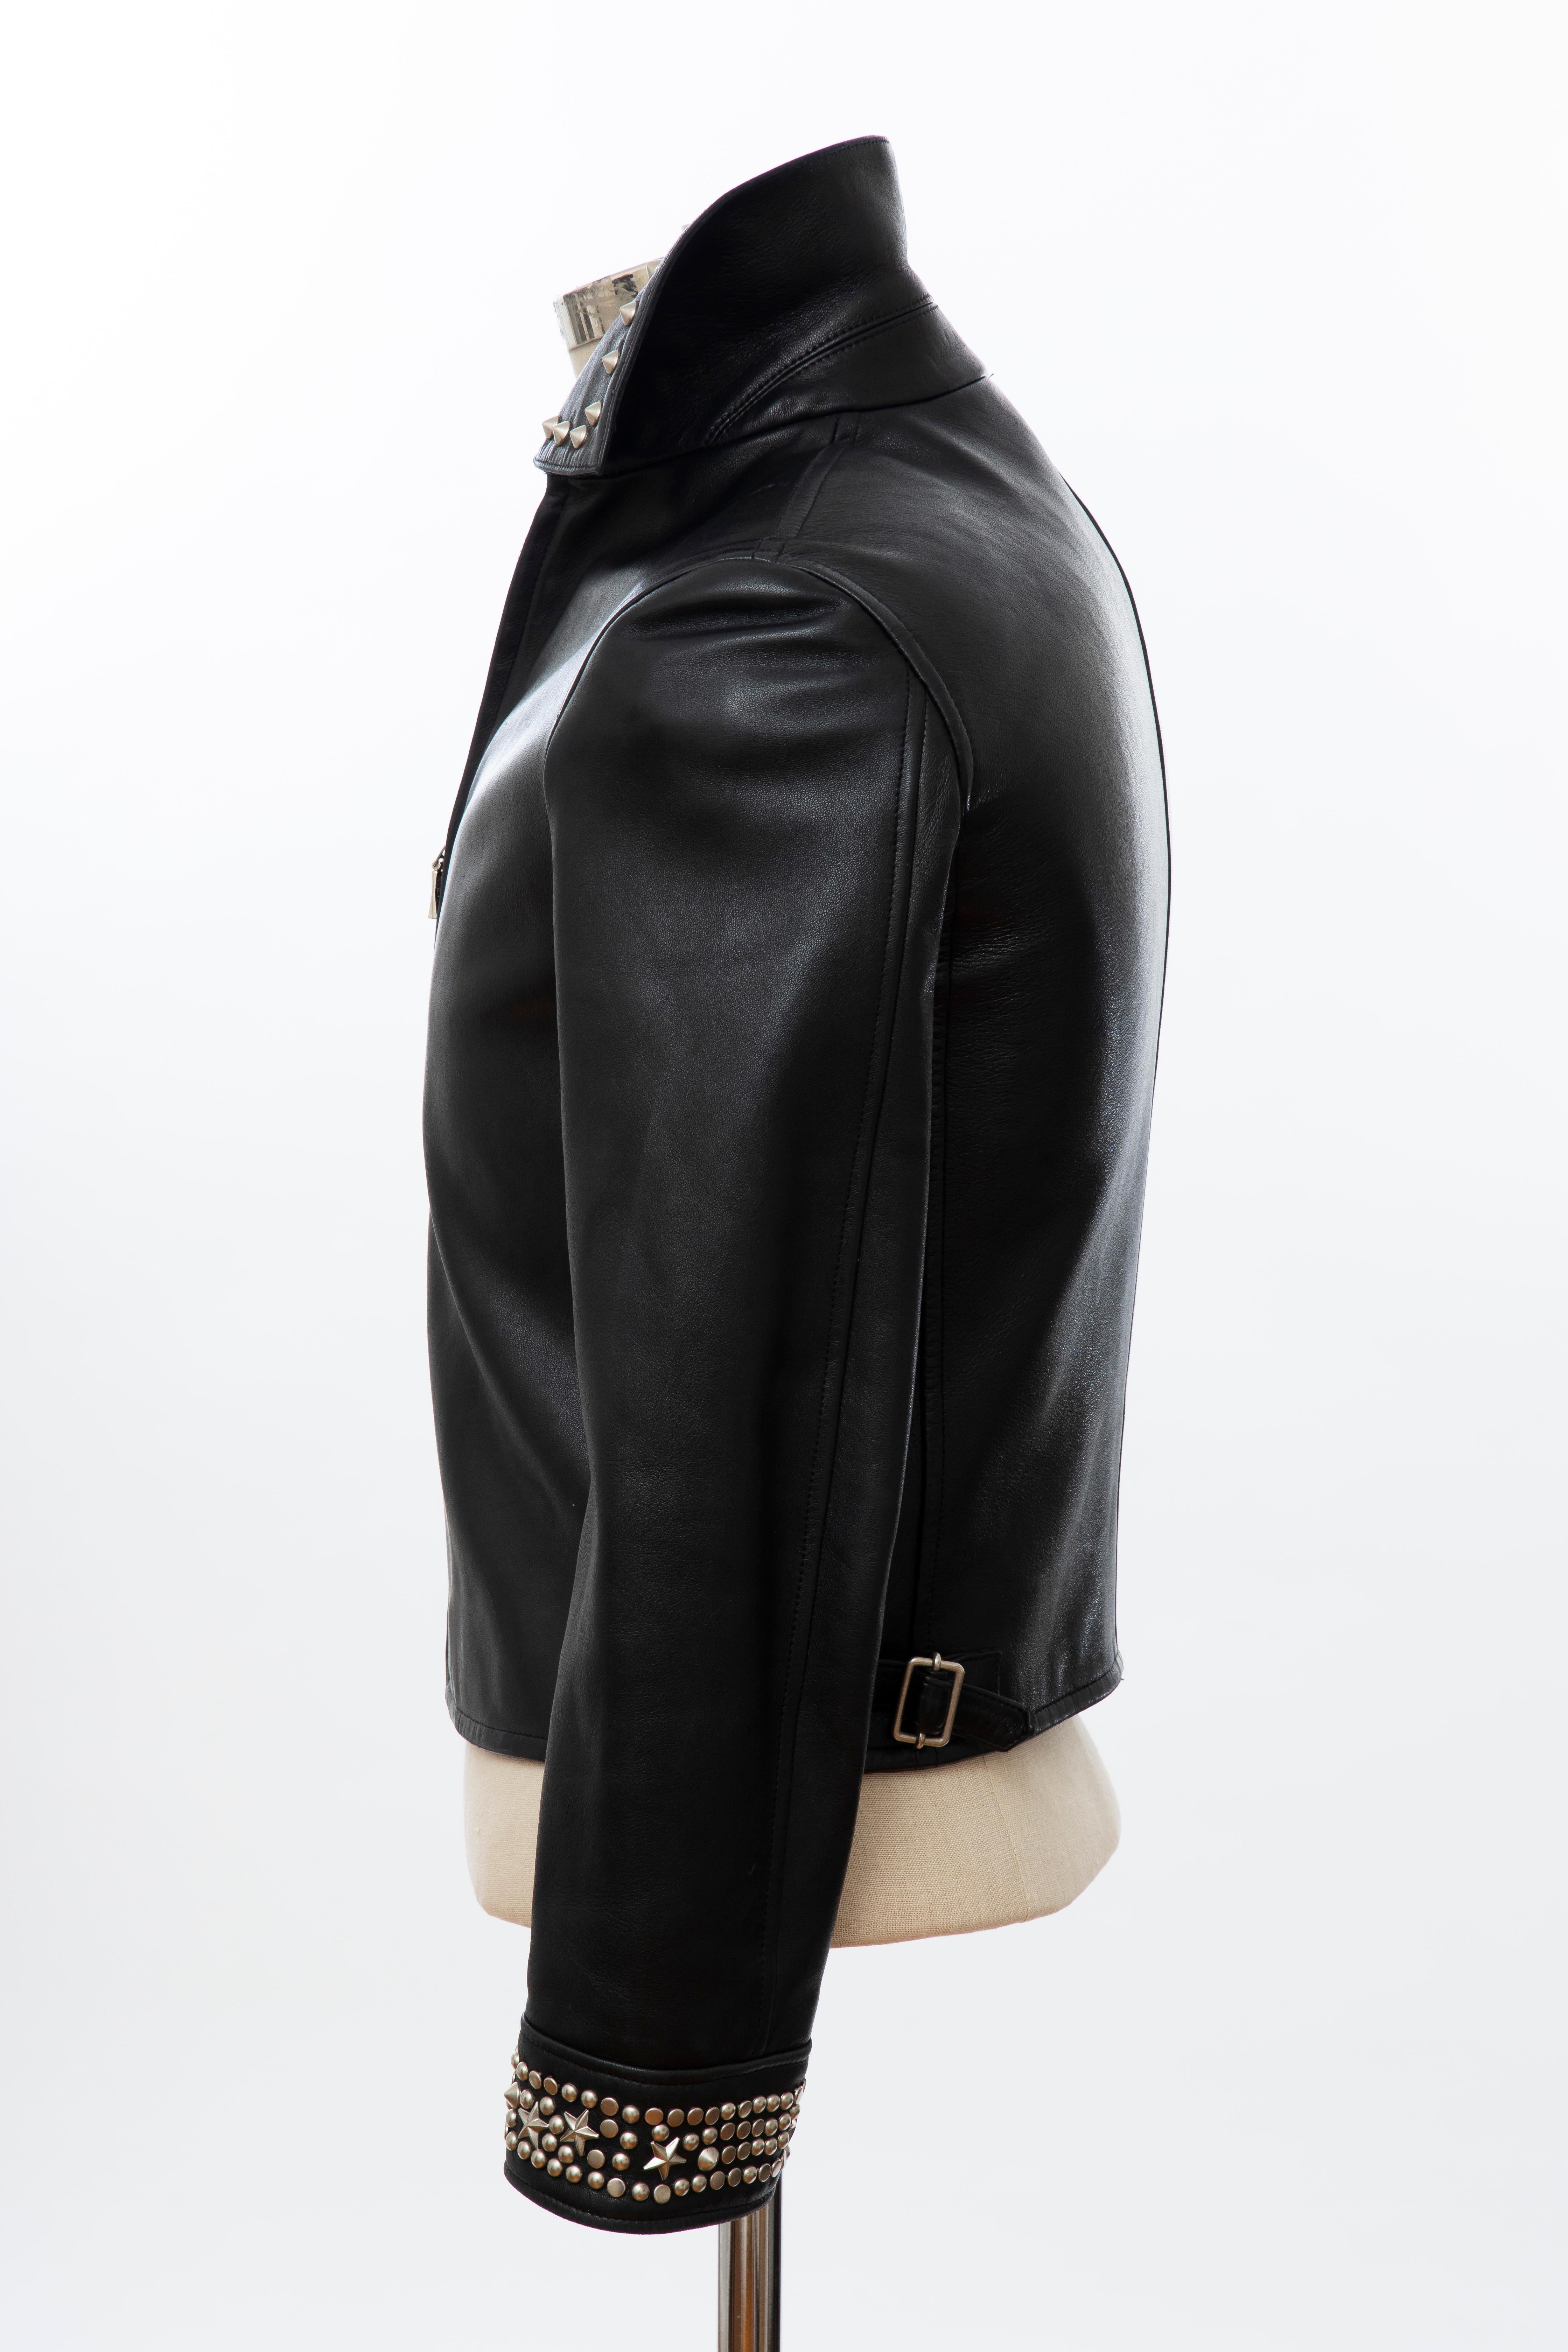 Gianni Versace Black Leather Jacket Pewter Stud Collar & Cuffs,  Circa: 1990's For Sale 4